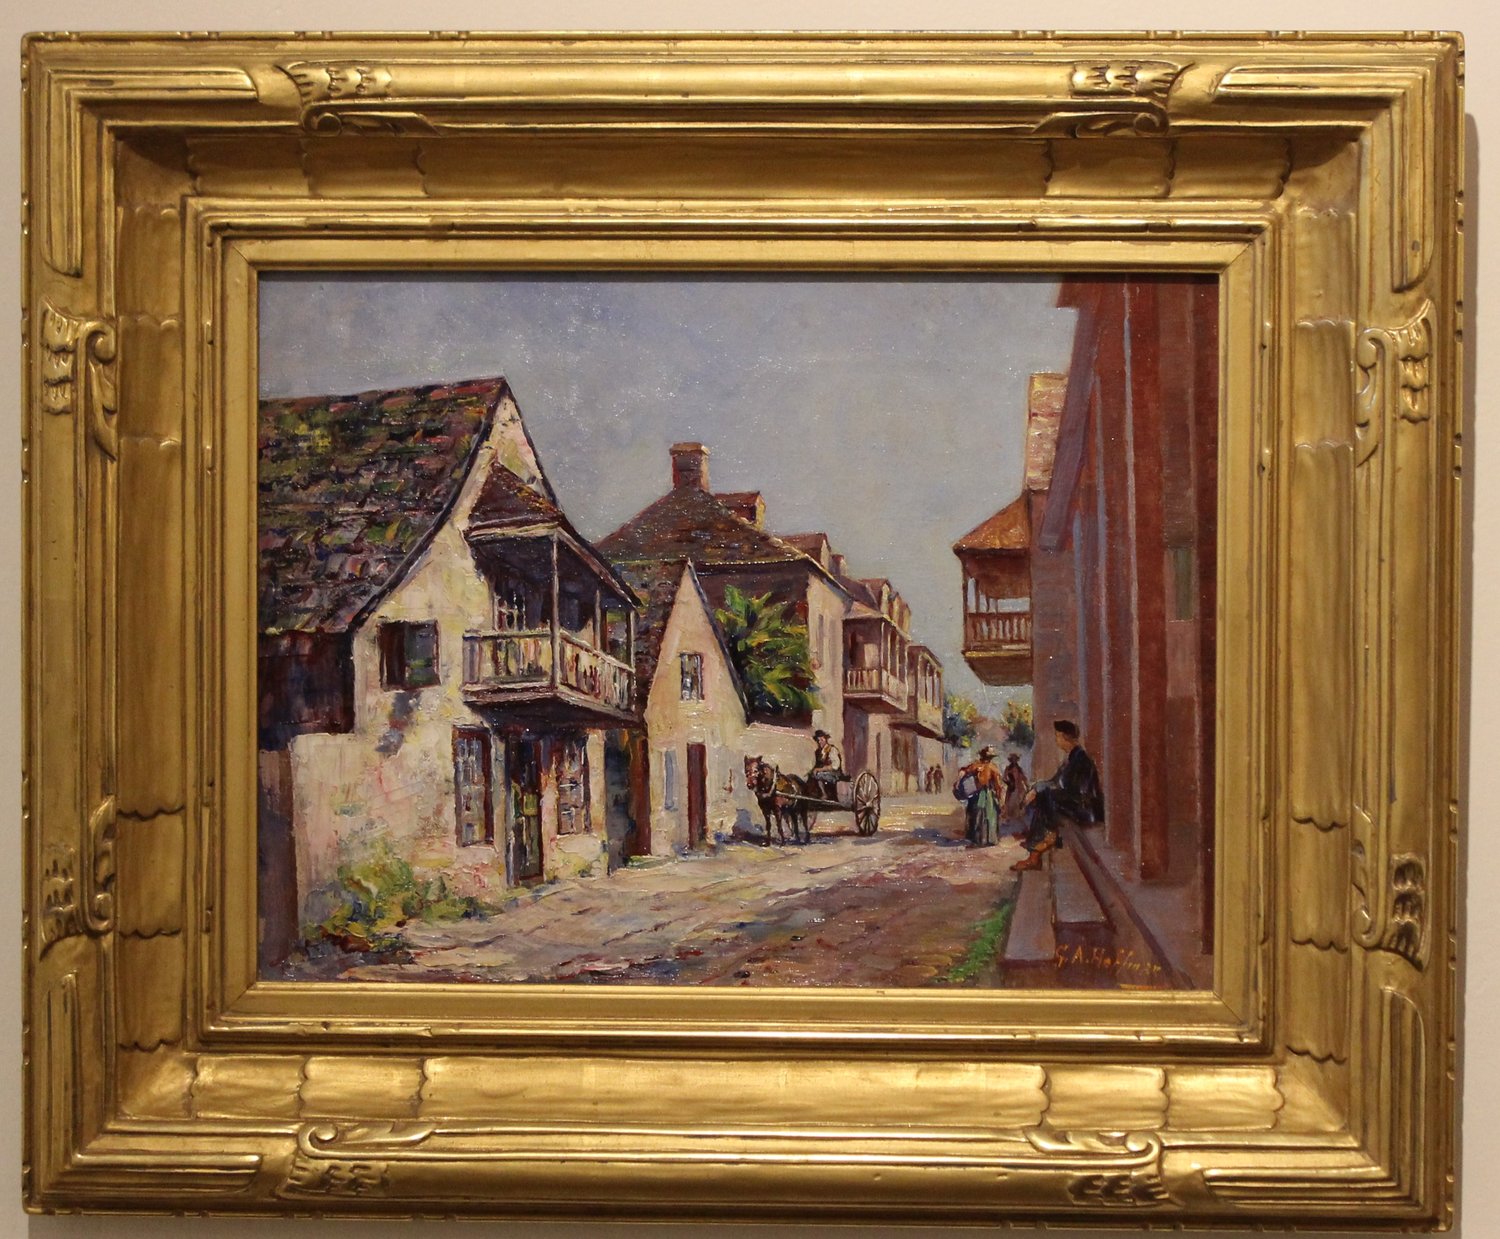 “Charlotte Street, St. Augustine” by Gustave Adolph Hoffman. 1905